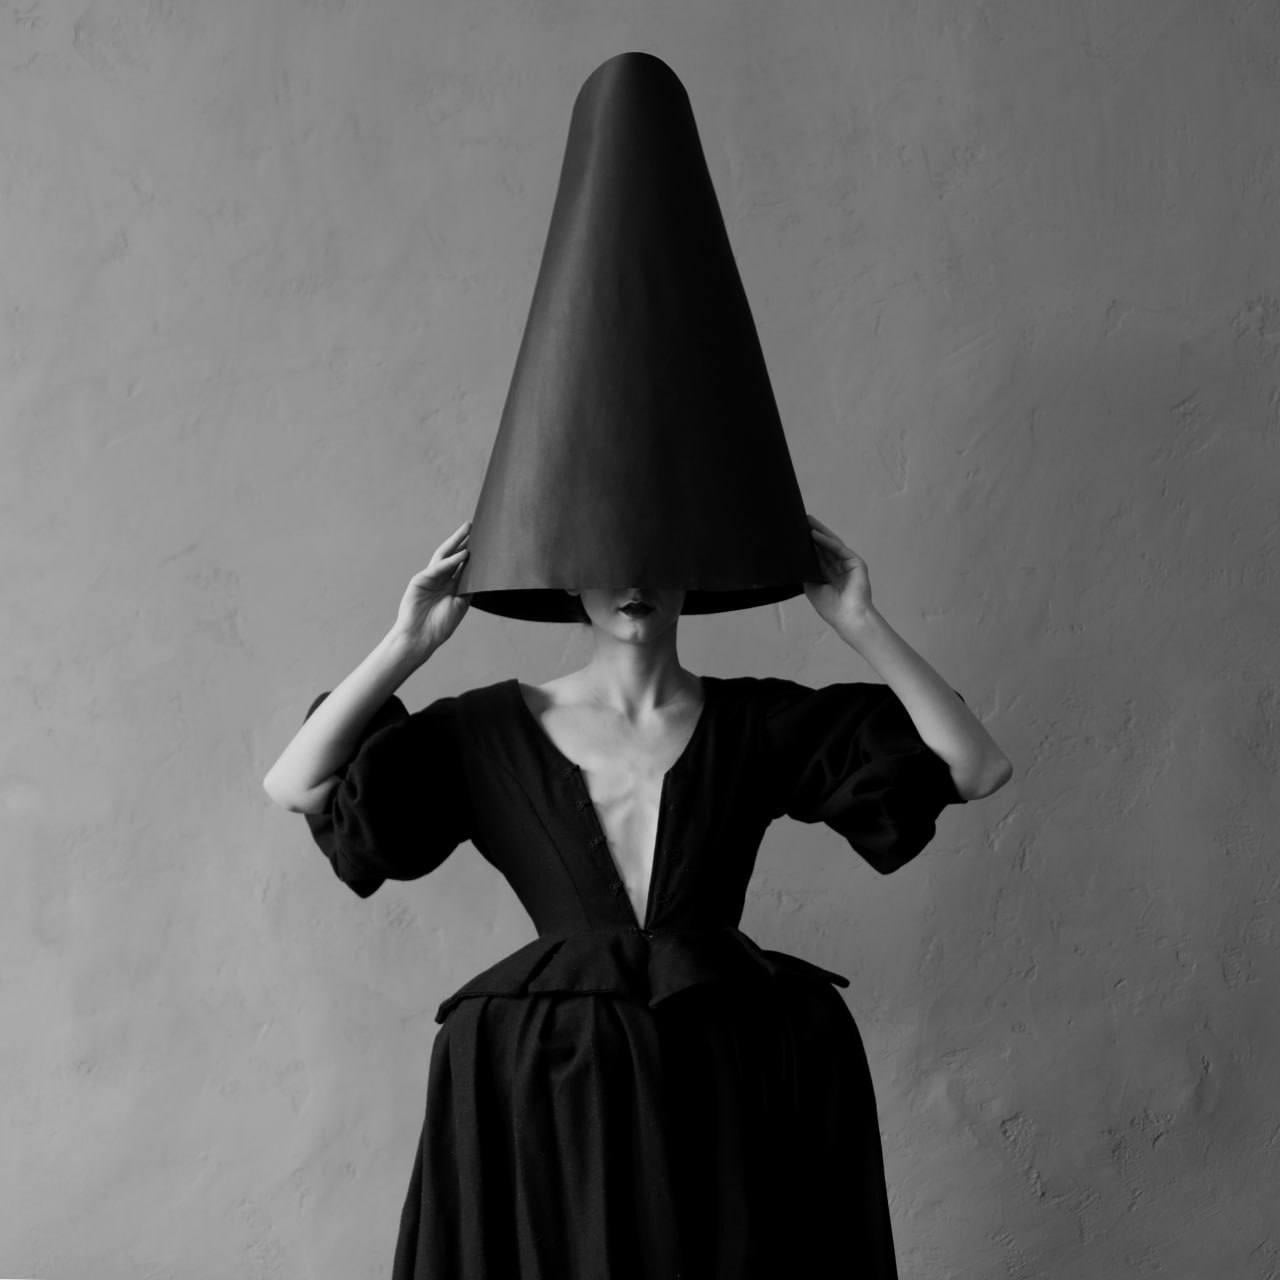 "Invisibility Hat" Photography 24" x 24" in Edition of 15 by Olha Stepanian